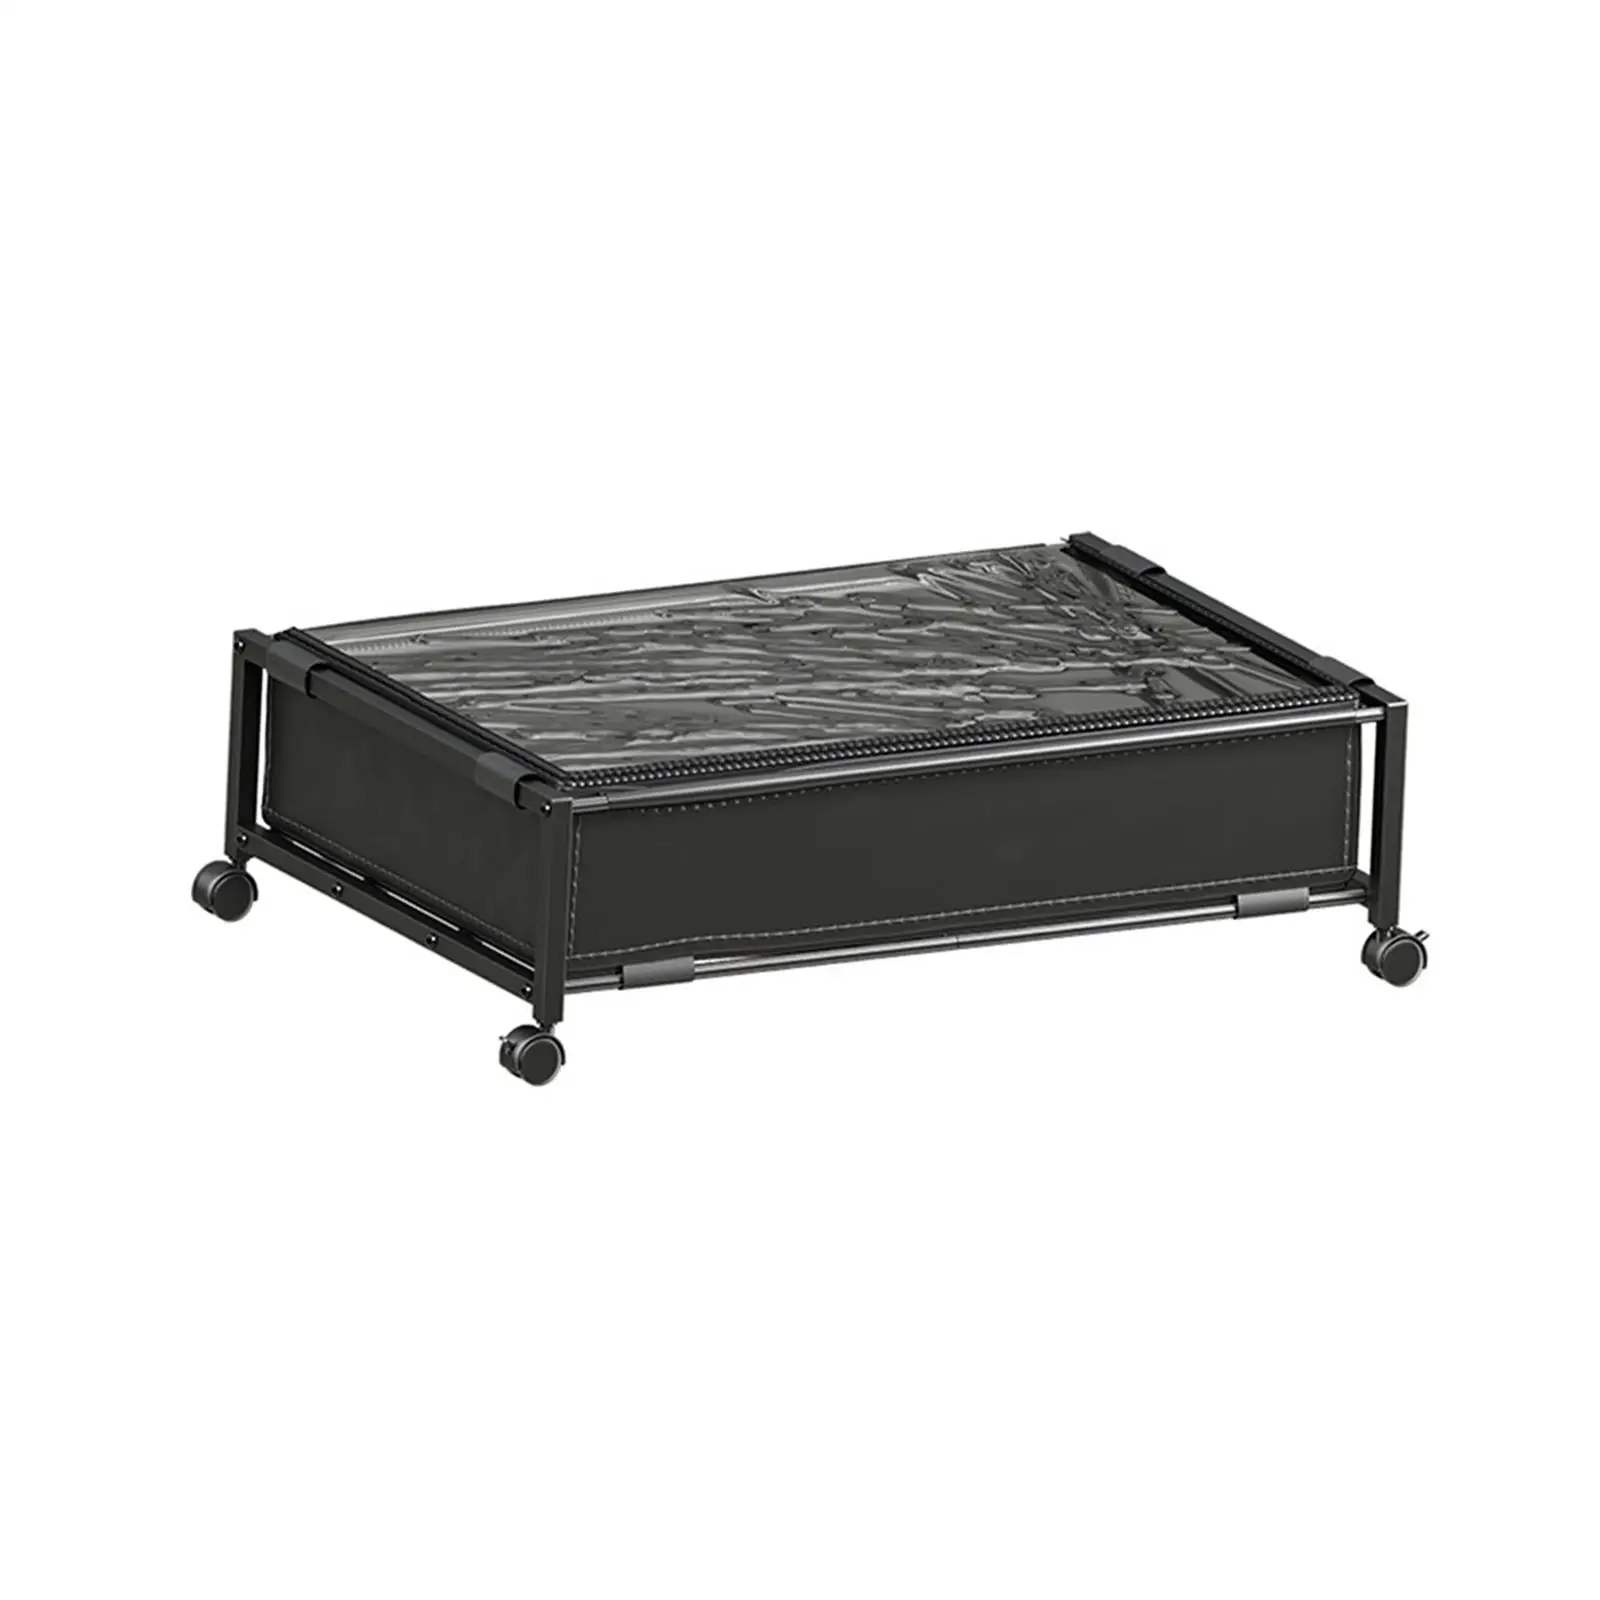 Bedroom Rolling Storage Drawer Saving Dustproof under Bed Storage with Wheels for Wardrobe Book Shoes Blanket Couches